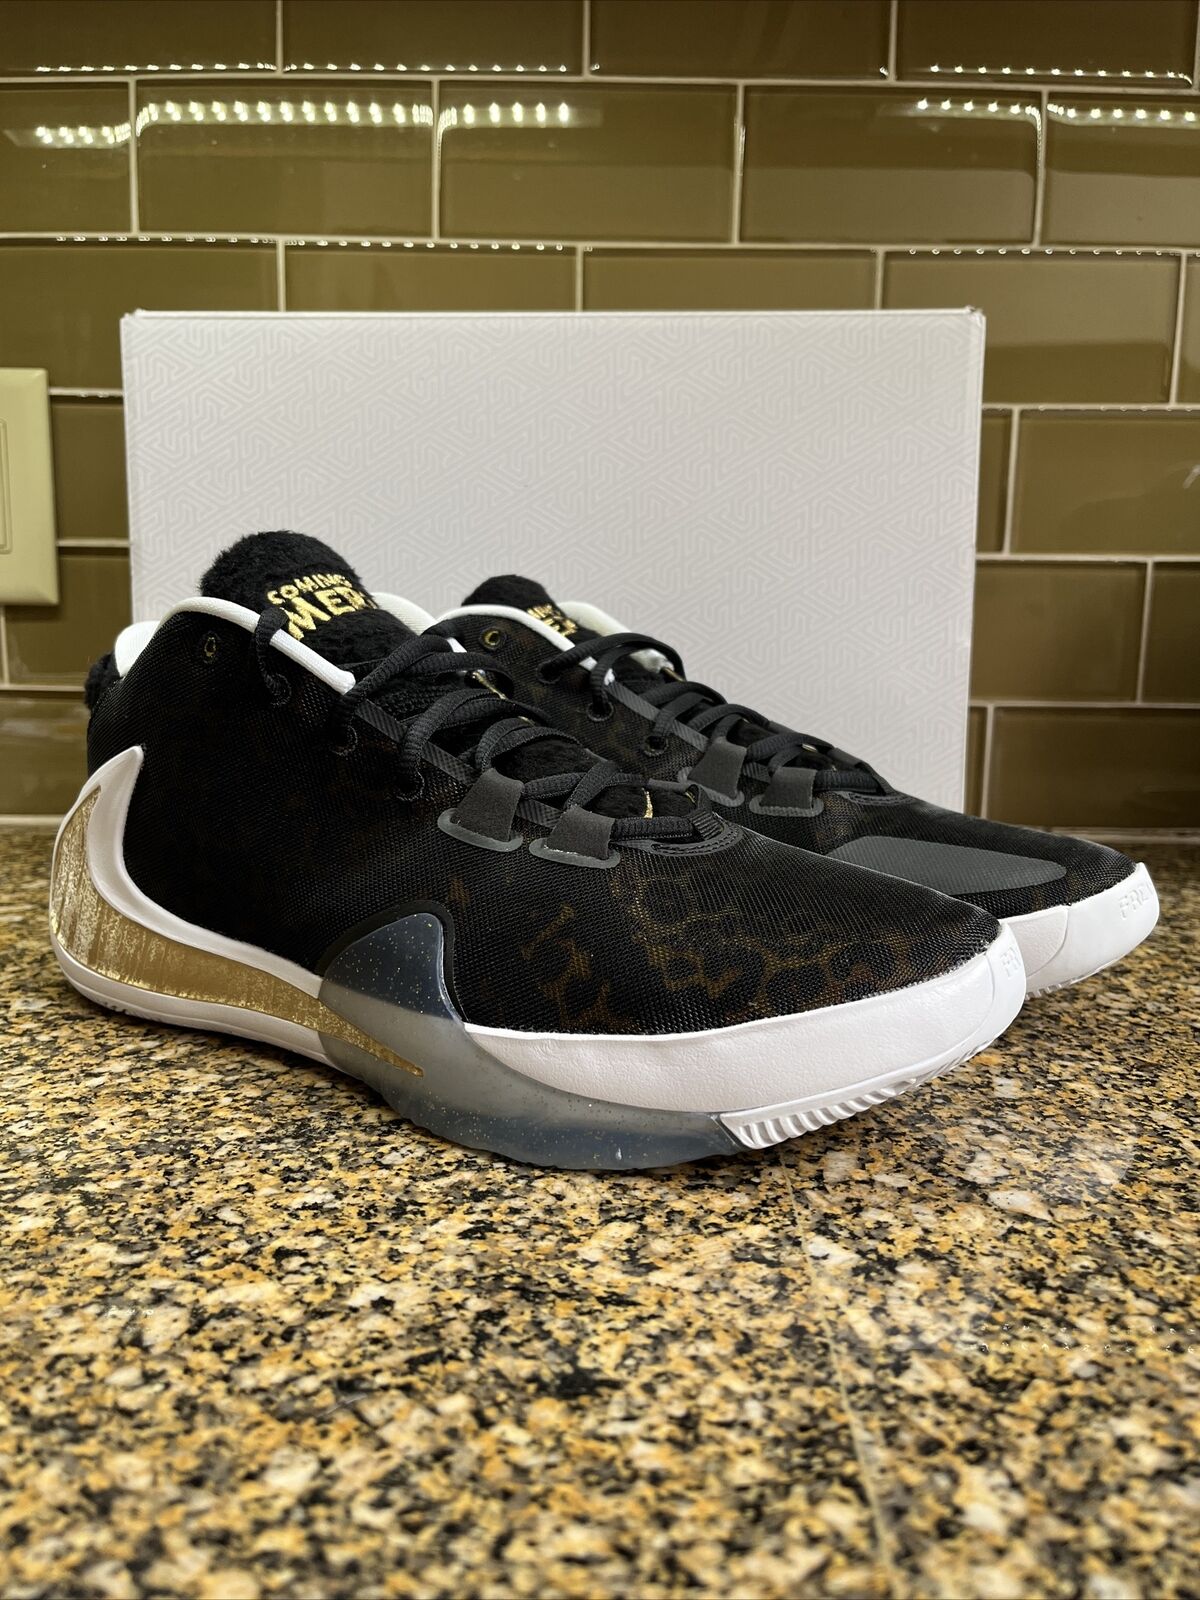 Molester miembro caricia Nike Zoom Freak 1 “Coming to America” Giannis's Shoes BQ5422-900 Size 10.5  | eBay